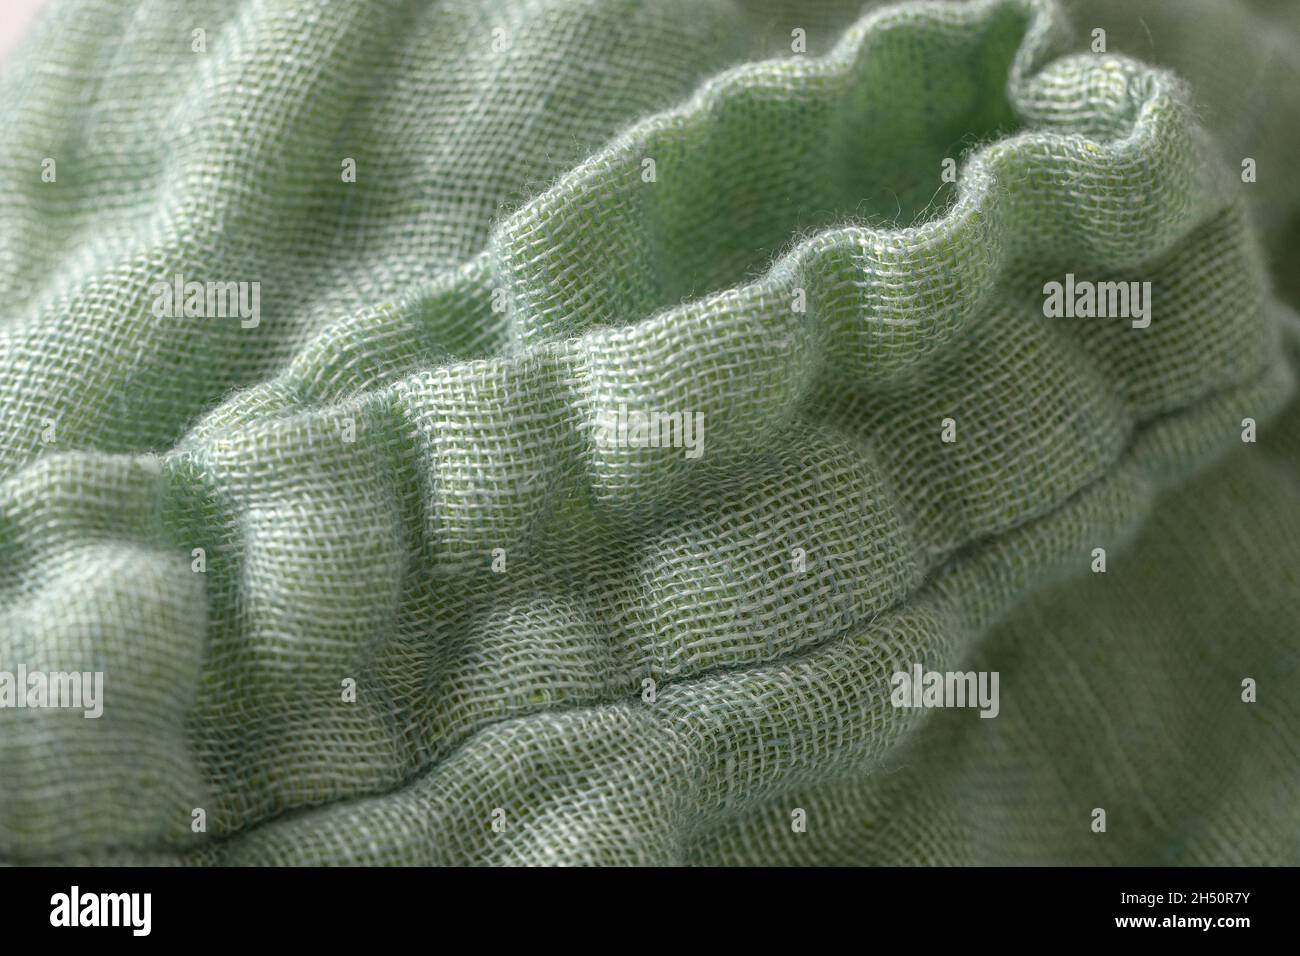 Linen fabric texture macro close up in mint shades Stock Photo